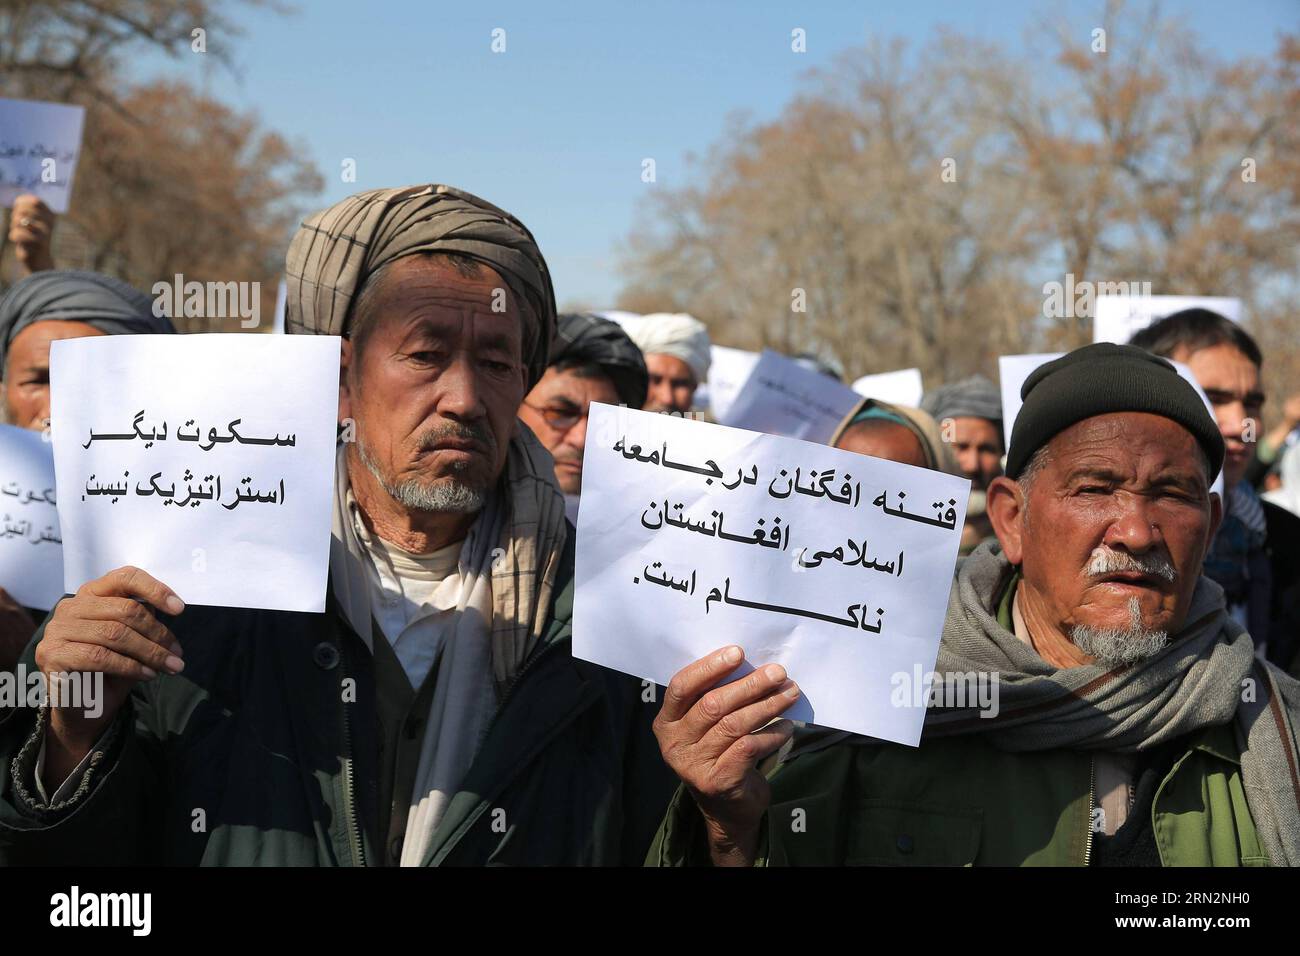 (150317) -- GHAZNI, March 17, 2015 -- Members of the Hazara community rally to protest against the kidnapping of 30 passengers allegedly by unknown armed men in Ghazni province, eastern Afghanistan, March 17, 2015. Thirty Hazara ethnic commuters were kidnapped in neighboring Zabul province late last month. ) (dzl) AFGHANISTAN-GHAZNI-PROTEST Rahmat PUBLICATIONxNOTxINxCHN   Ghazni March 17 2015 Members of The Hazara Community Rally to Protest against The Kidnapping of 30 Passengers allegedly by Unknown Armed Men in Ghazni Province Eastern Afghanistan March 17 2015 Thirty Hazara Ethnic commuters Stock Photo